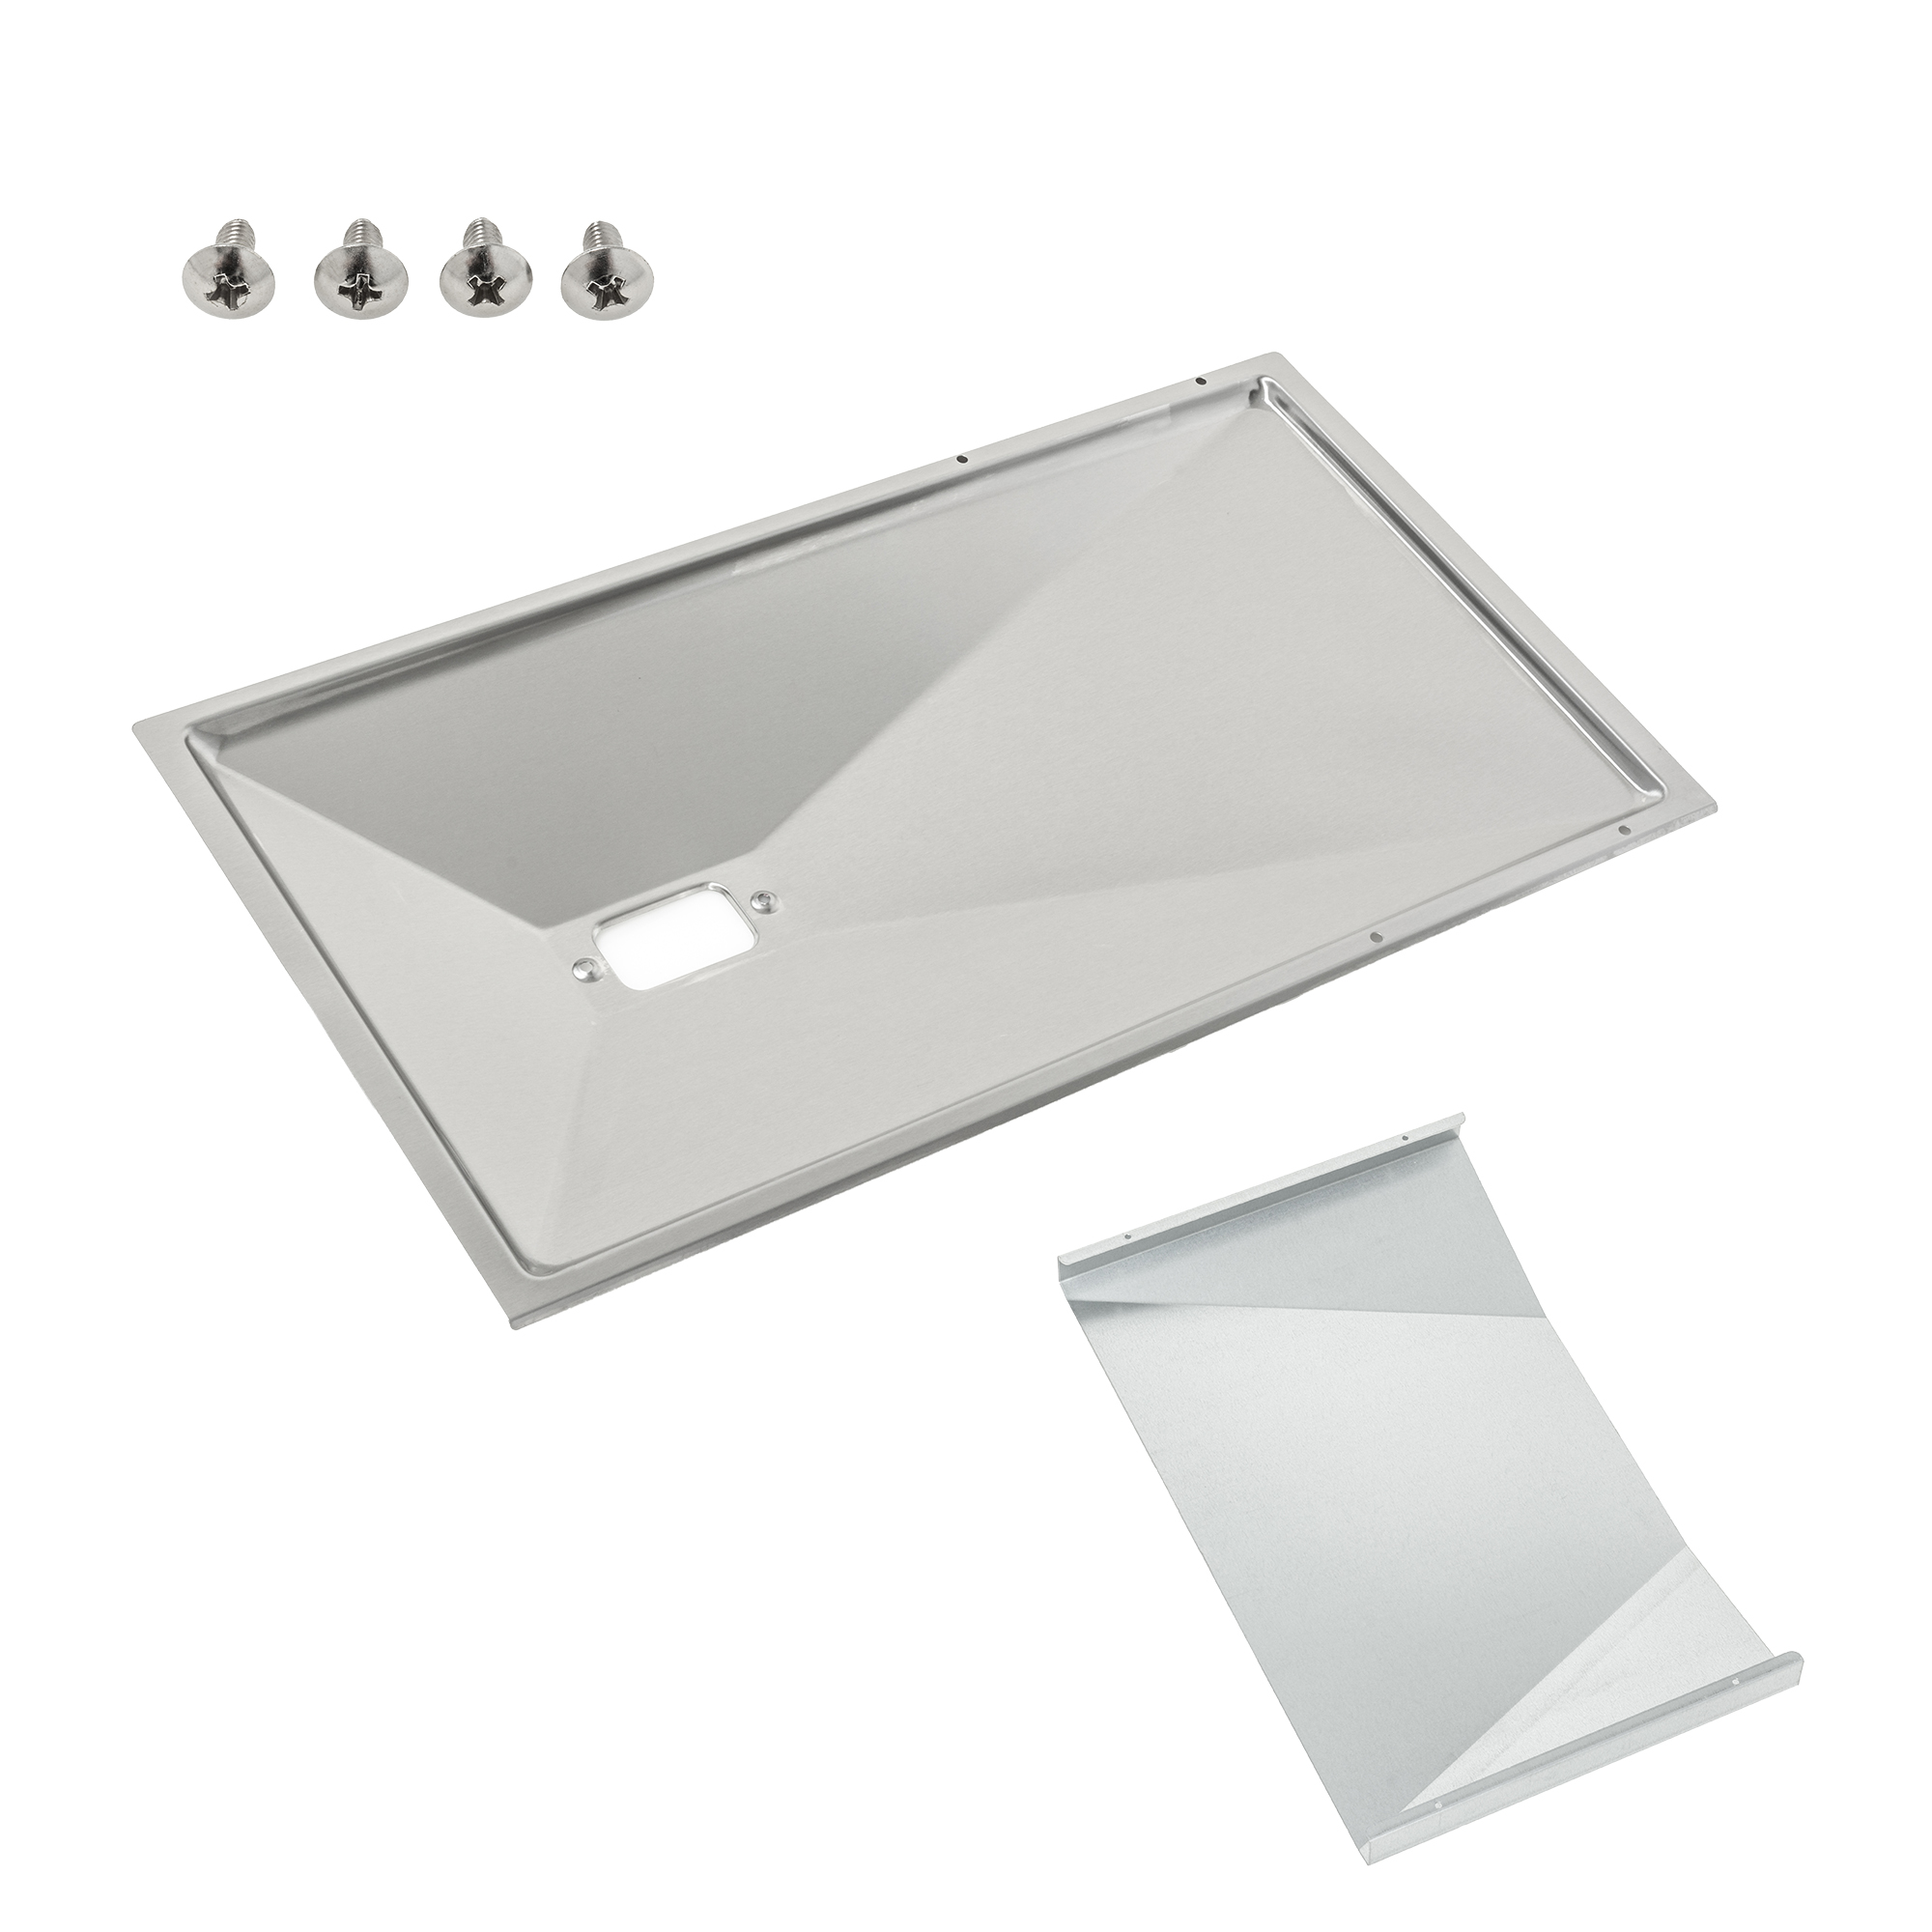 Grease tray Videro G4/G4-S stainless steel - w. heat insulation board